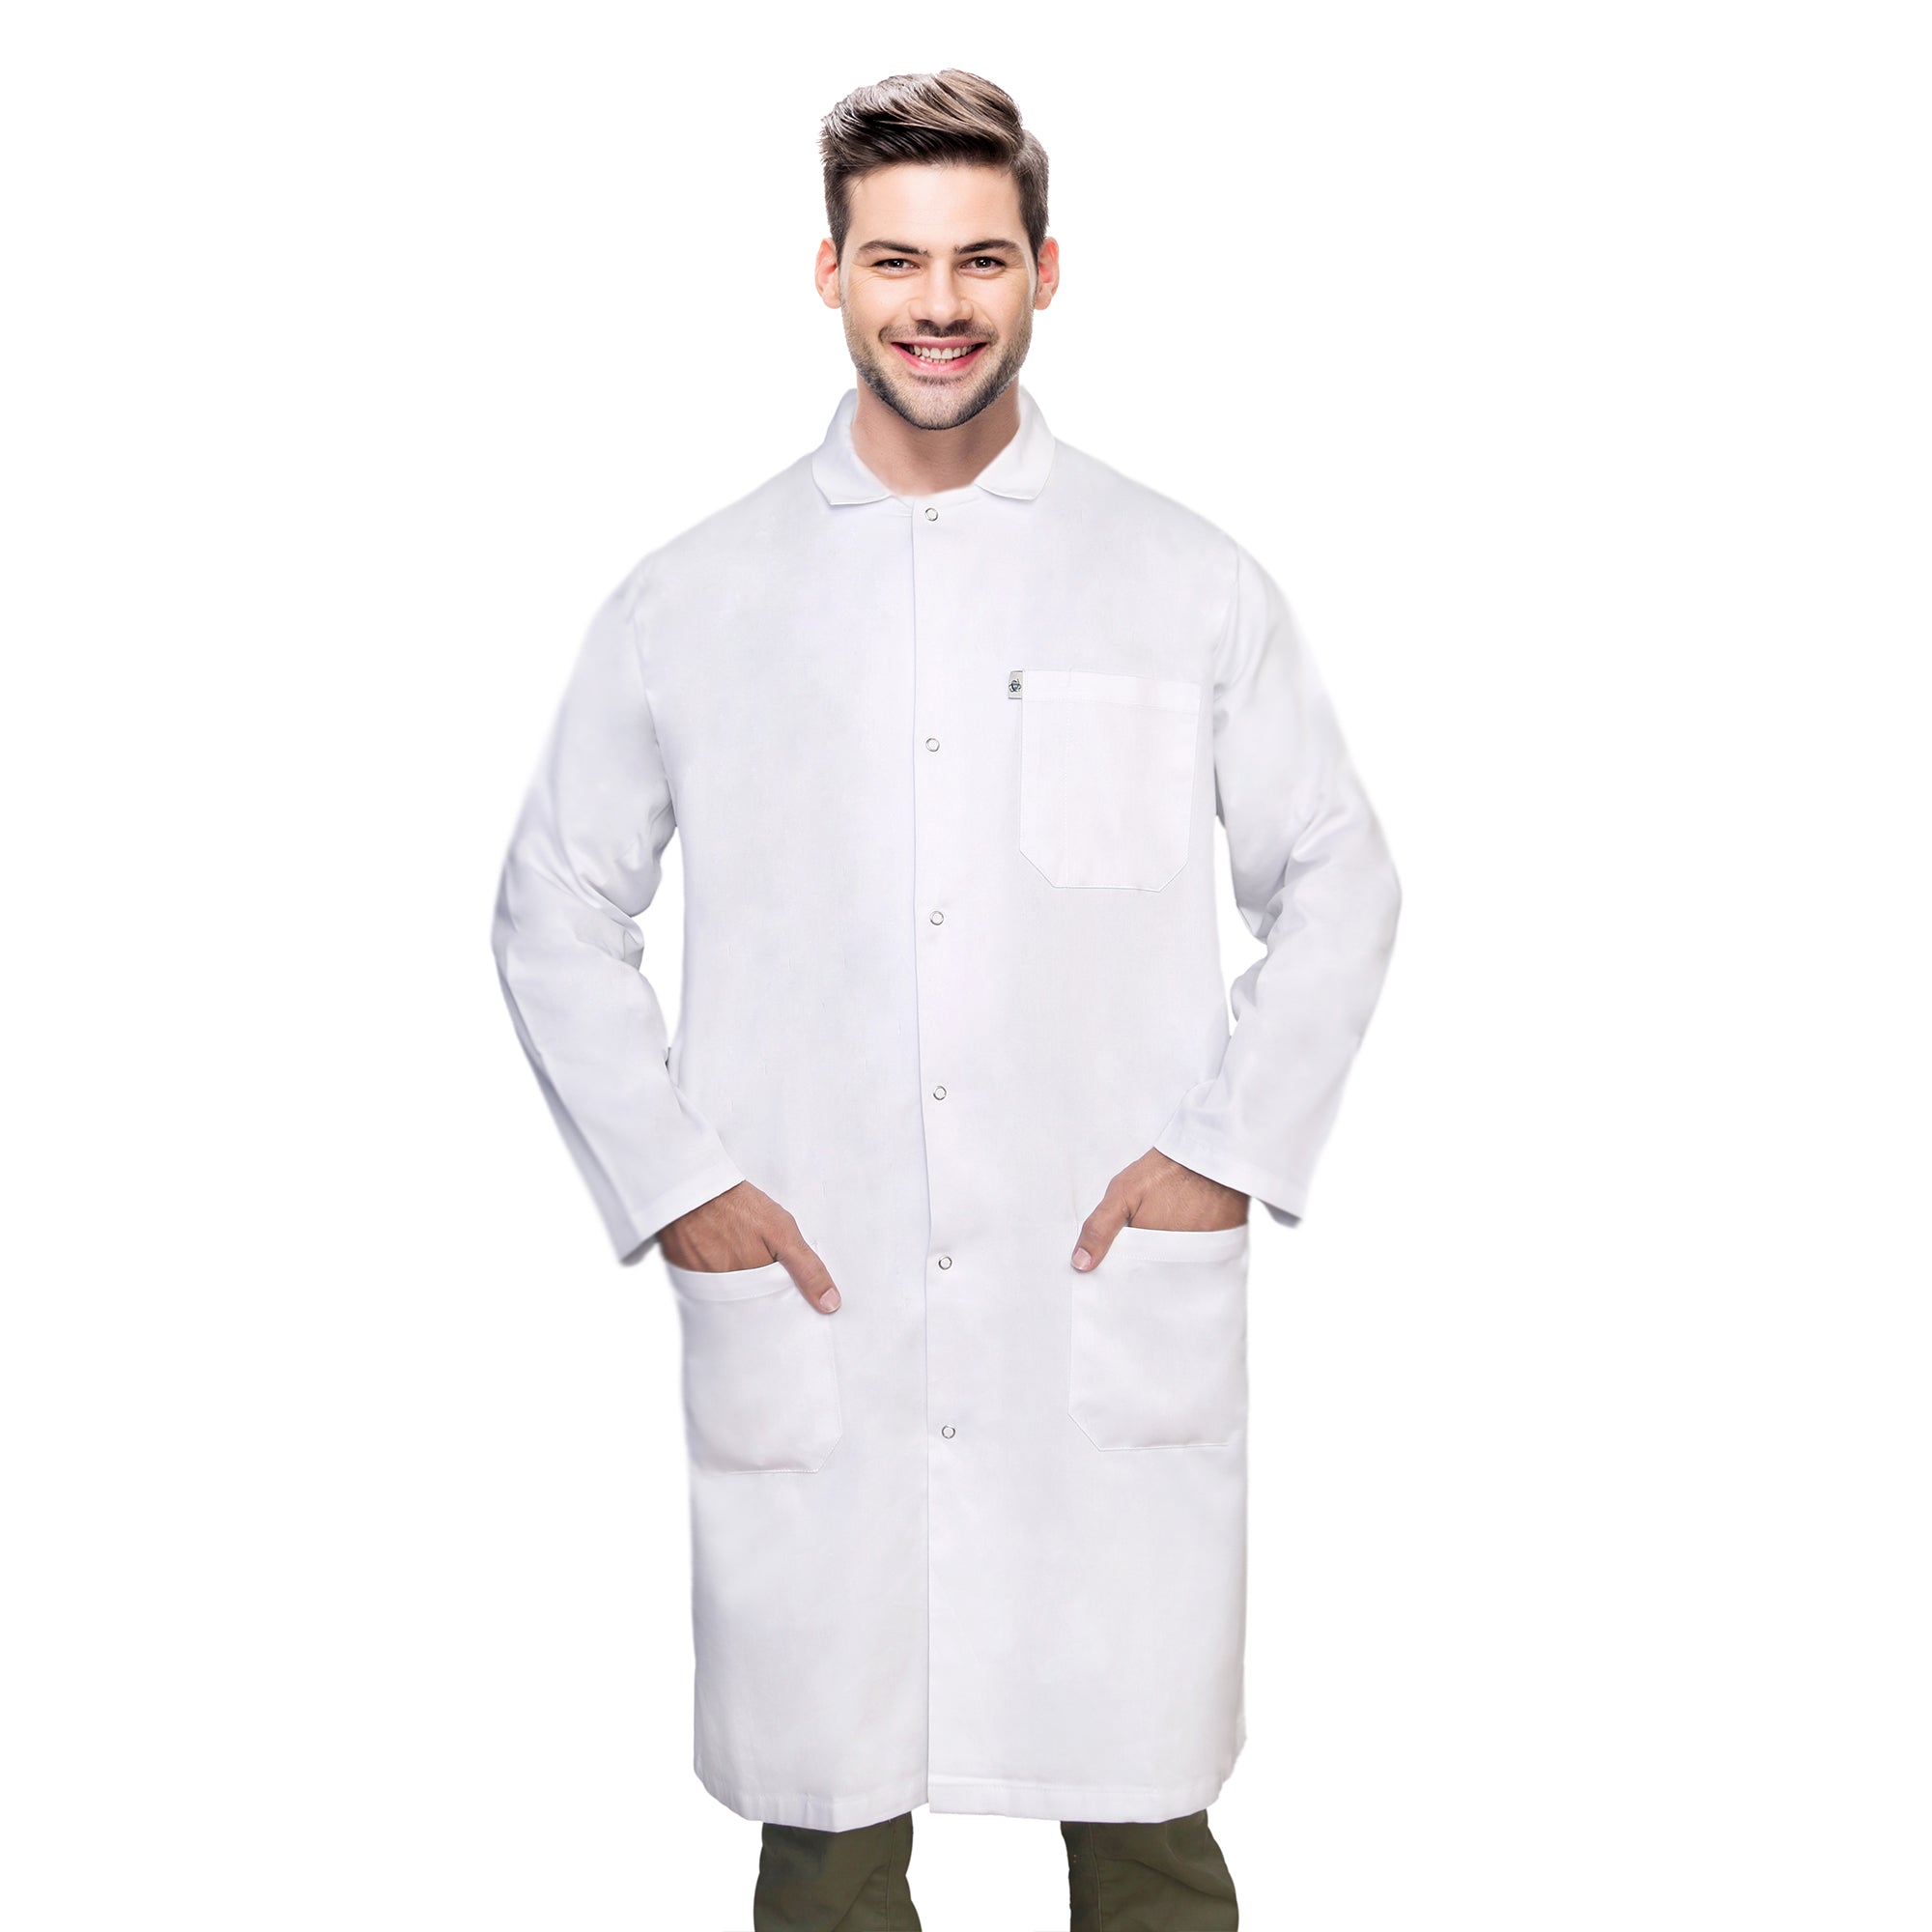 Lab Coat, Breathable Micro Film Material, White w/ snaps and 3